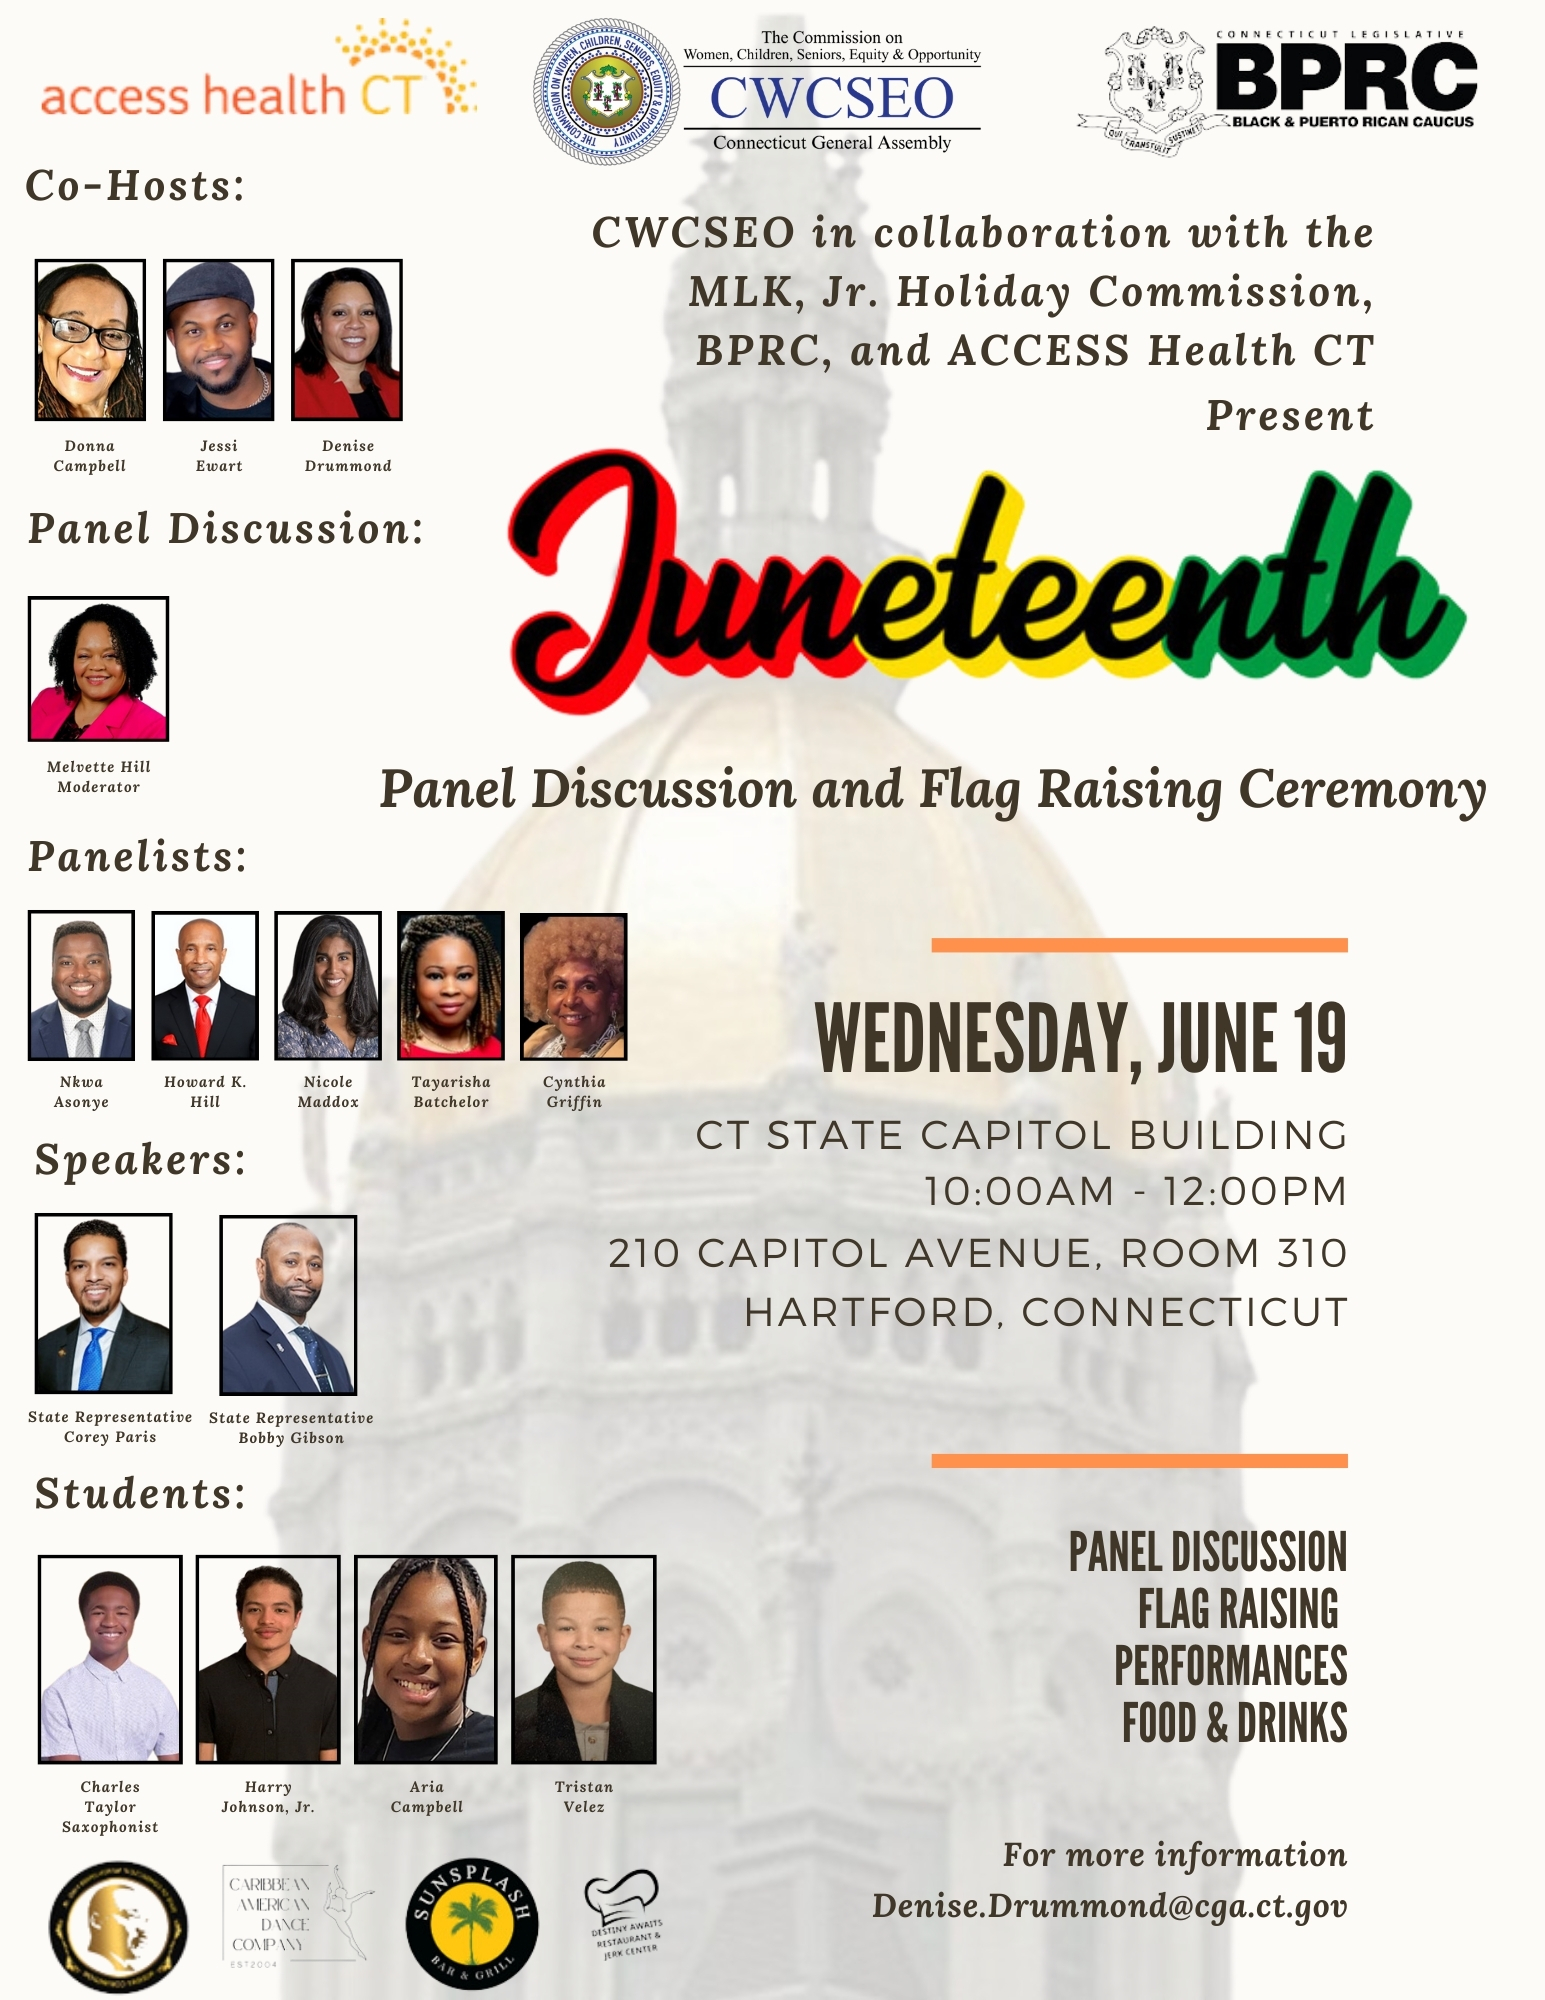 I'm honored to be a guest speaker at this Juneteenth event at the State Capitol.